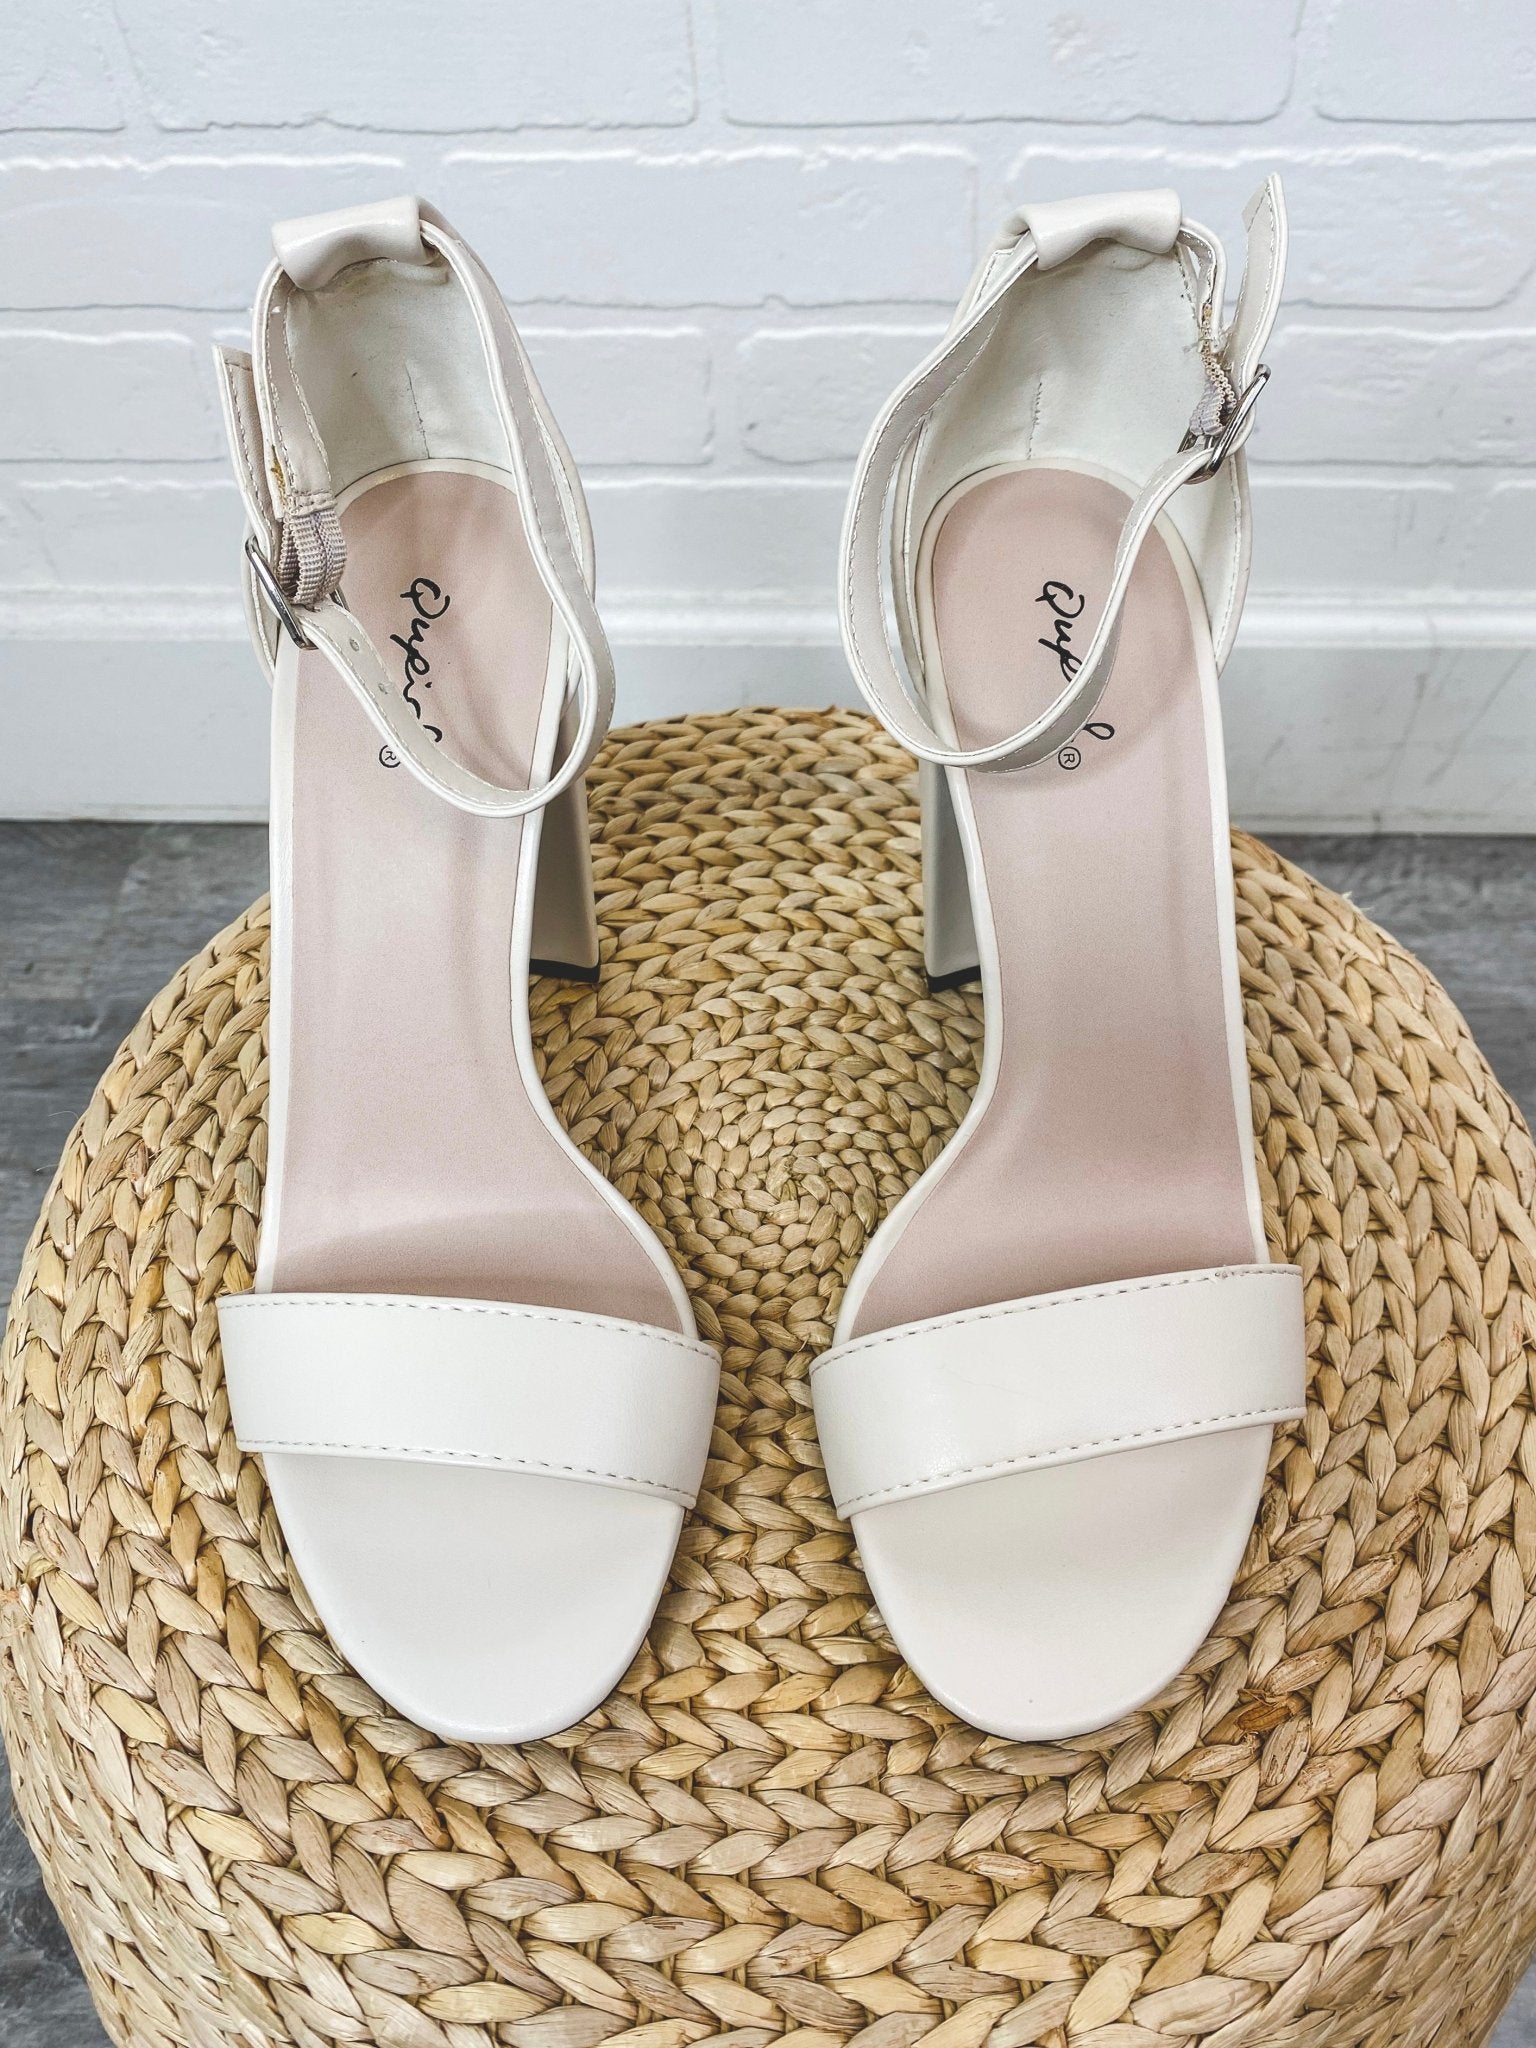 Cashmere ankle strap heel off white Stylish shoes - Womens Fashion Shoes at Lush Fashion Lounge Boutique in Oklahoma City